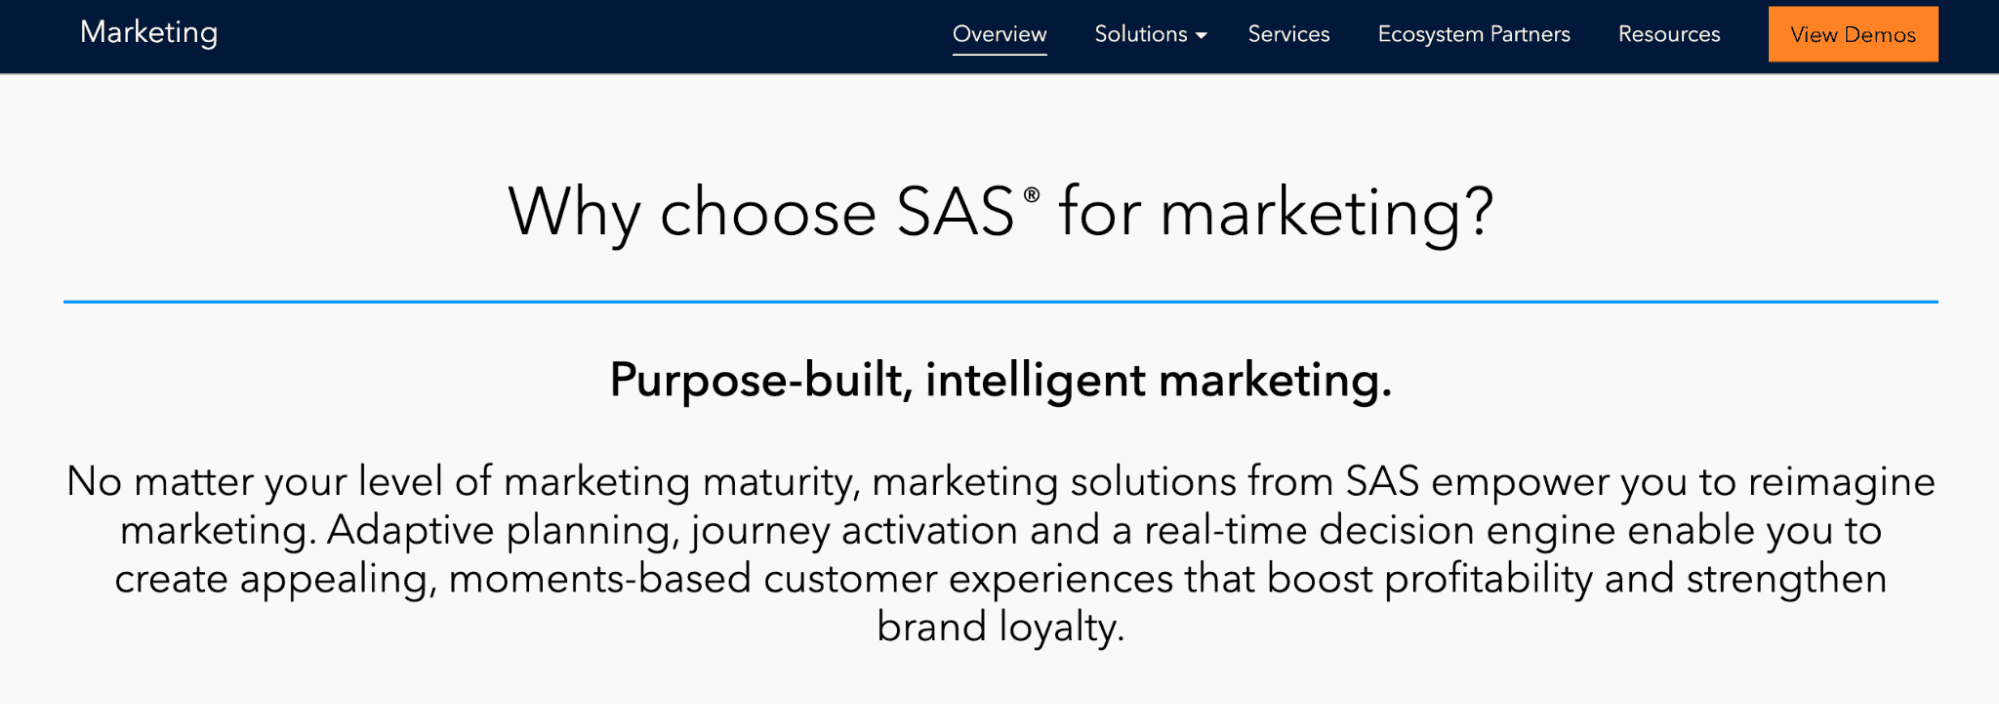 SAS is labeled as an intelligent marketing management resource.